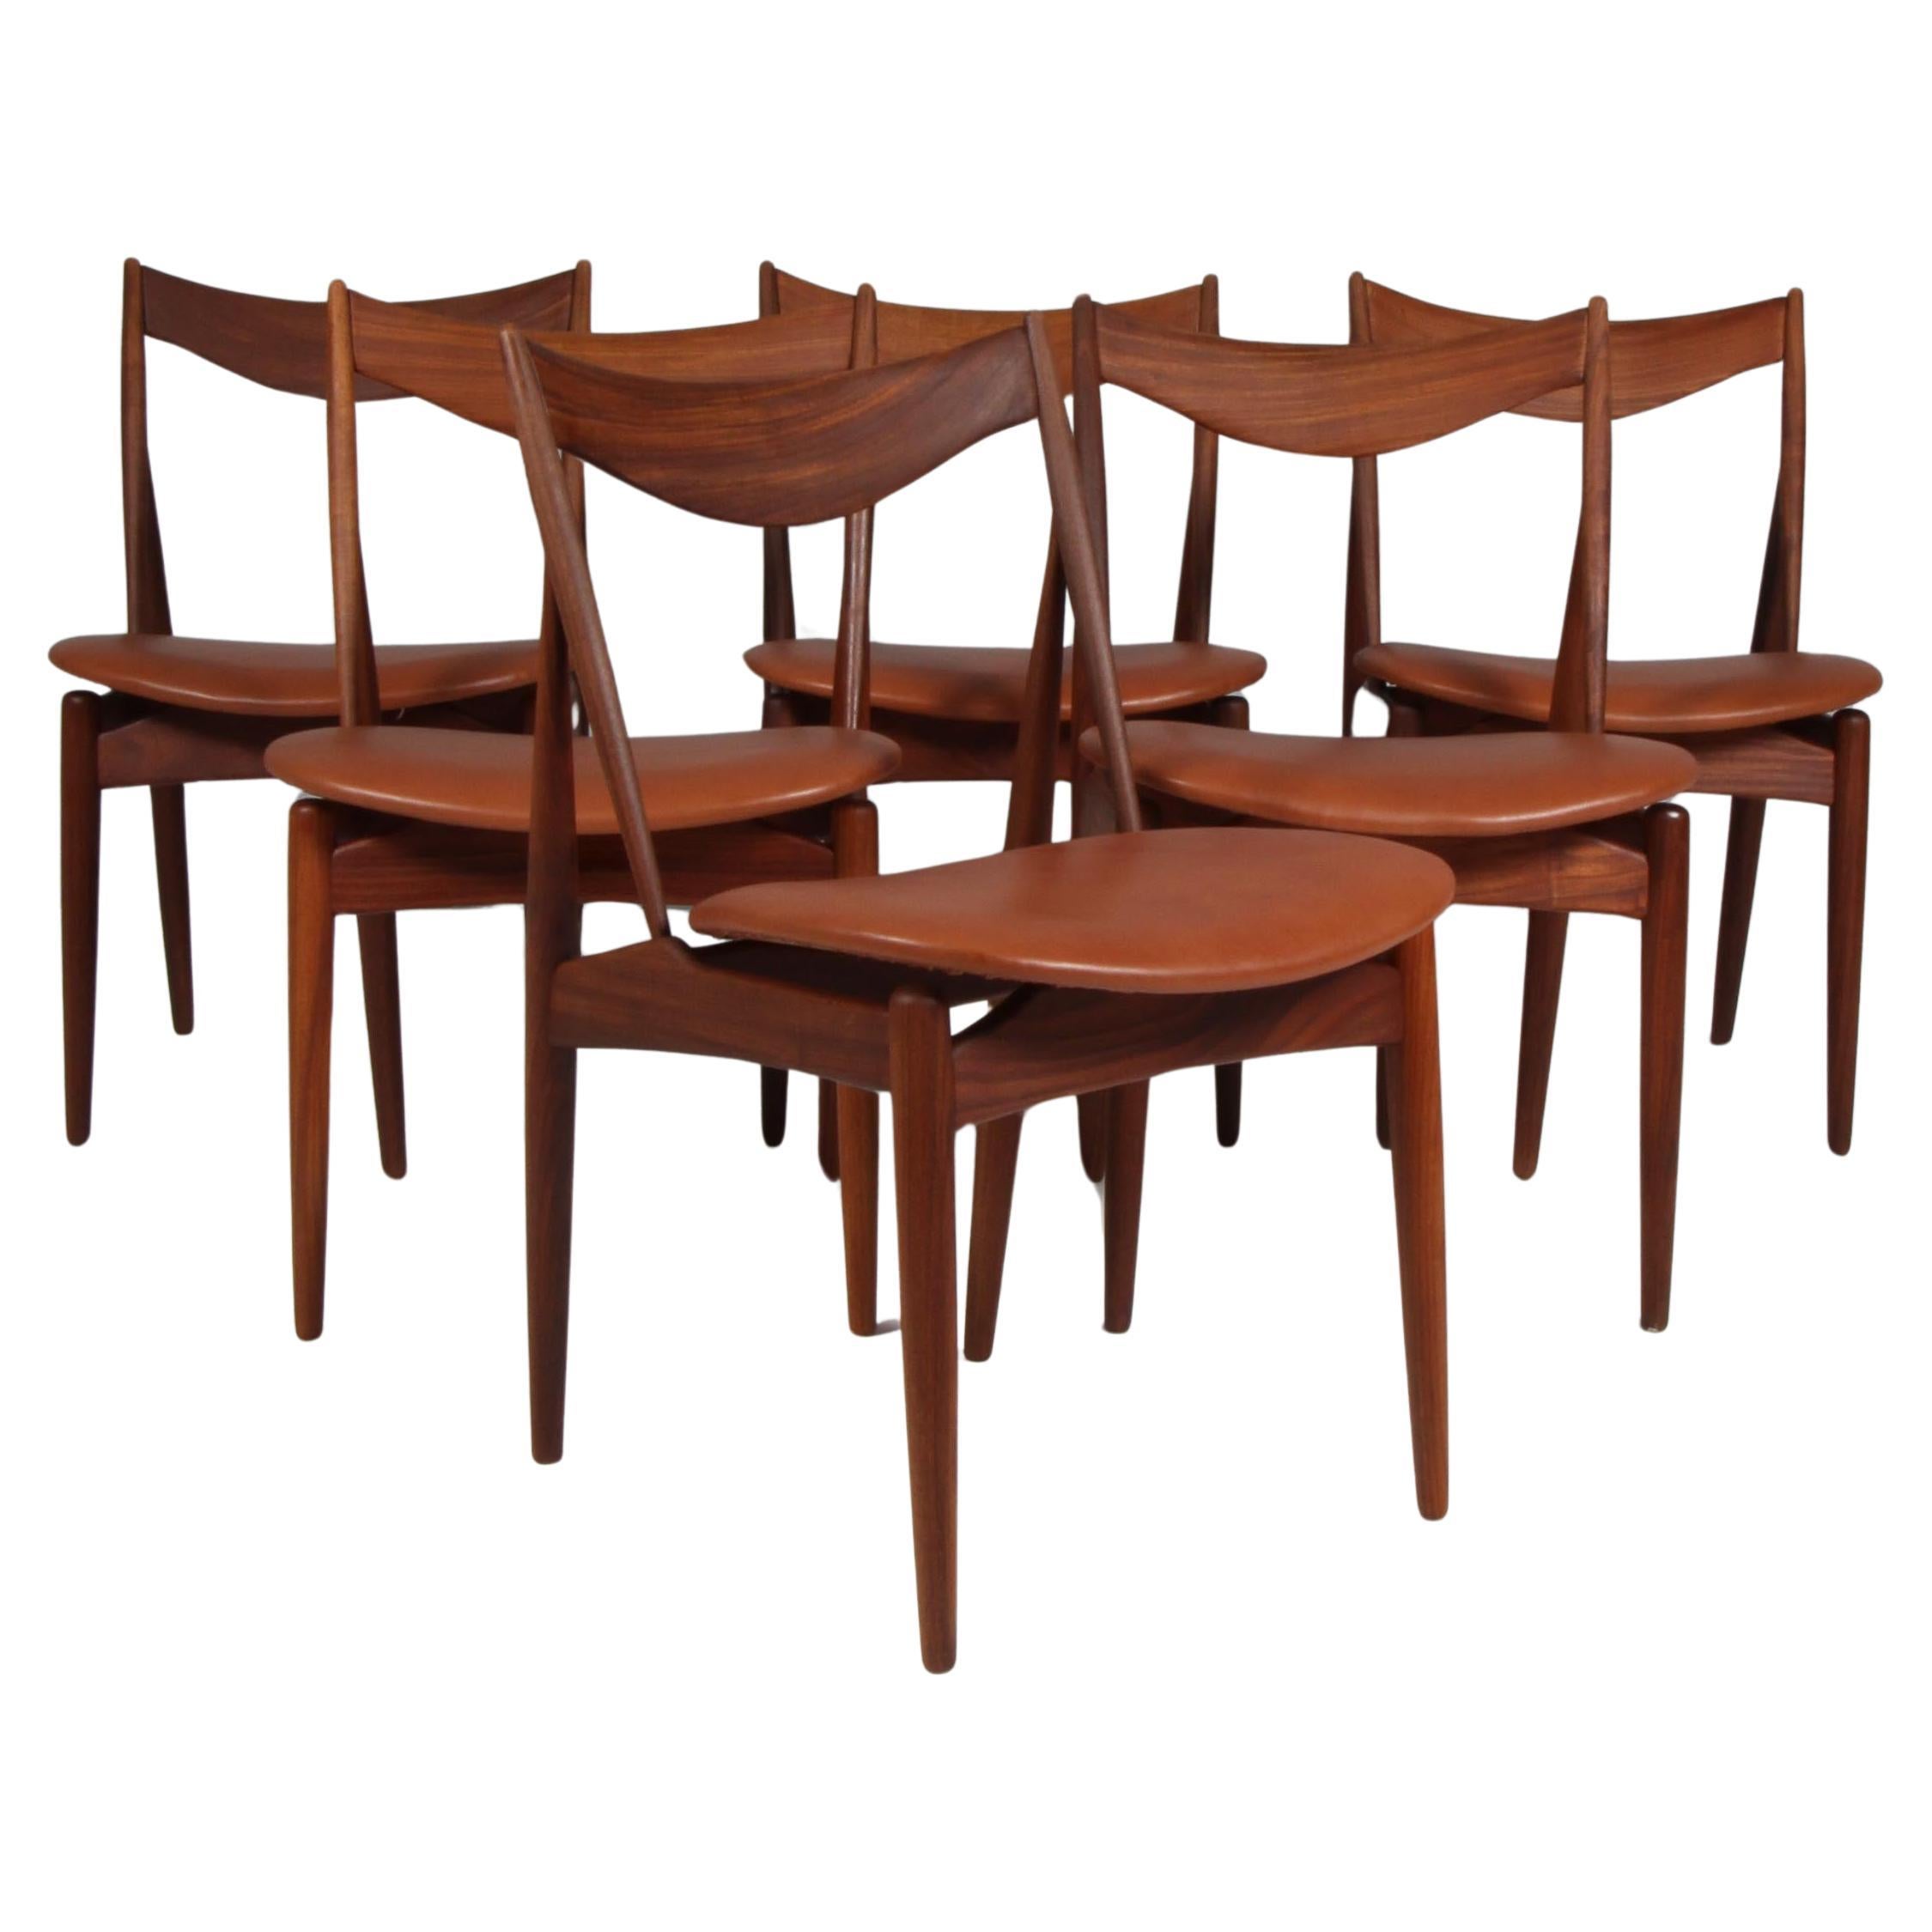 Henry W. Klein Six Dining Chairs, teak and full grain leather